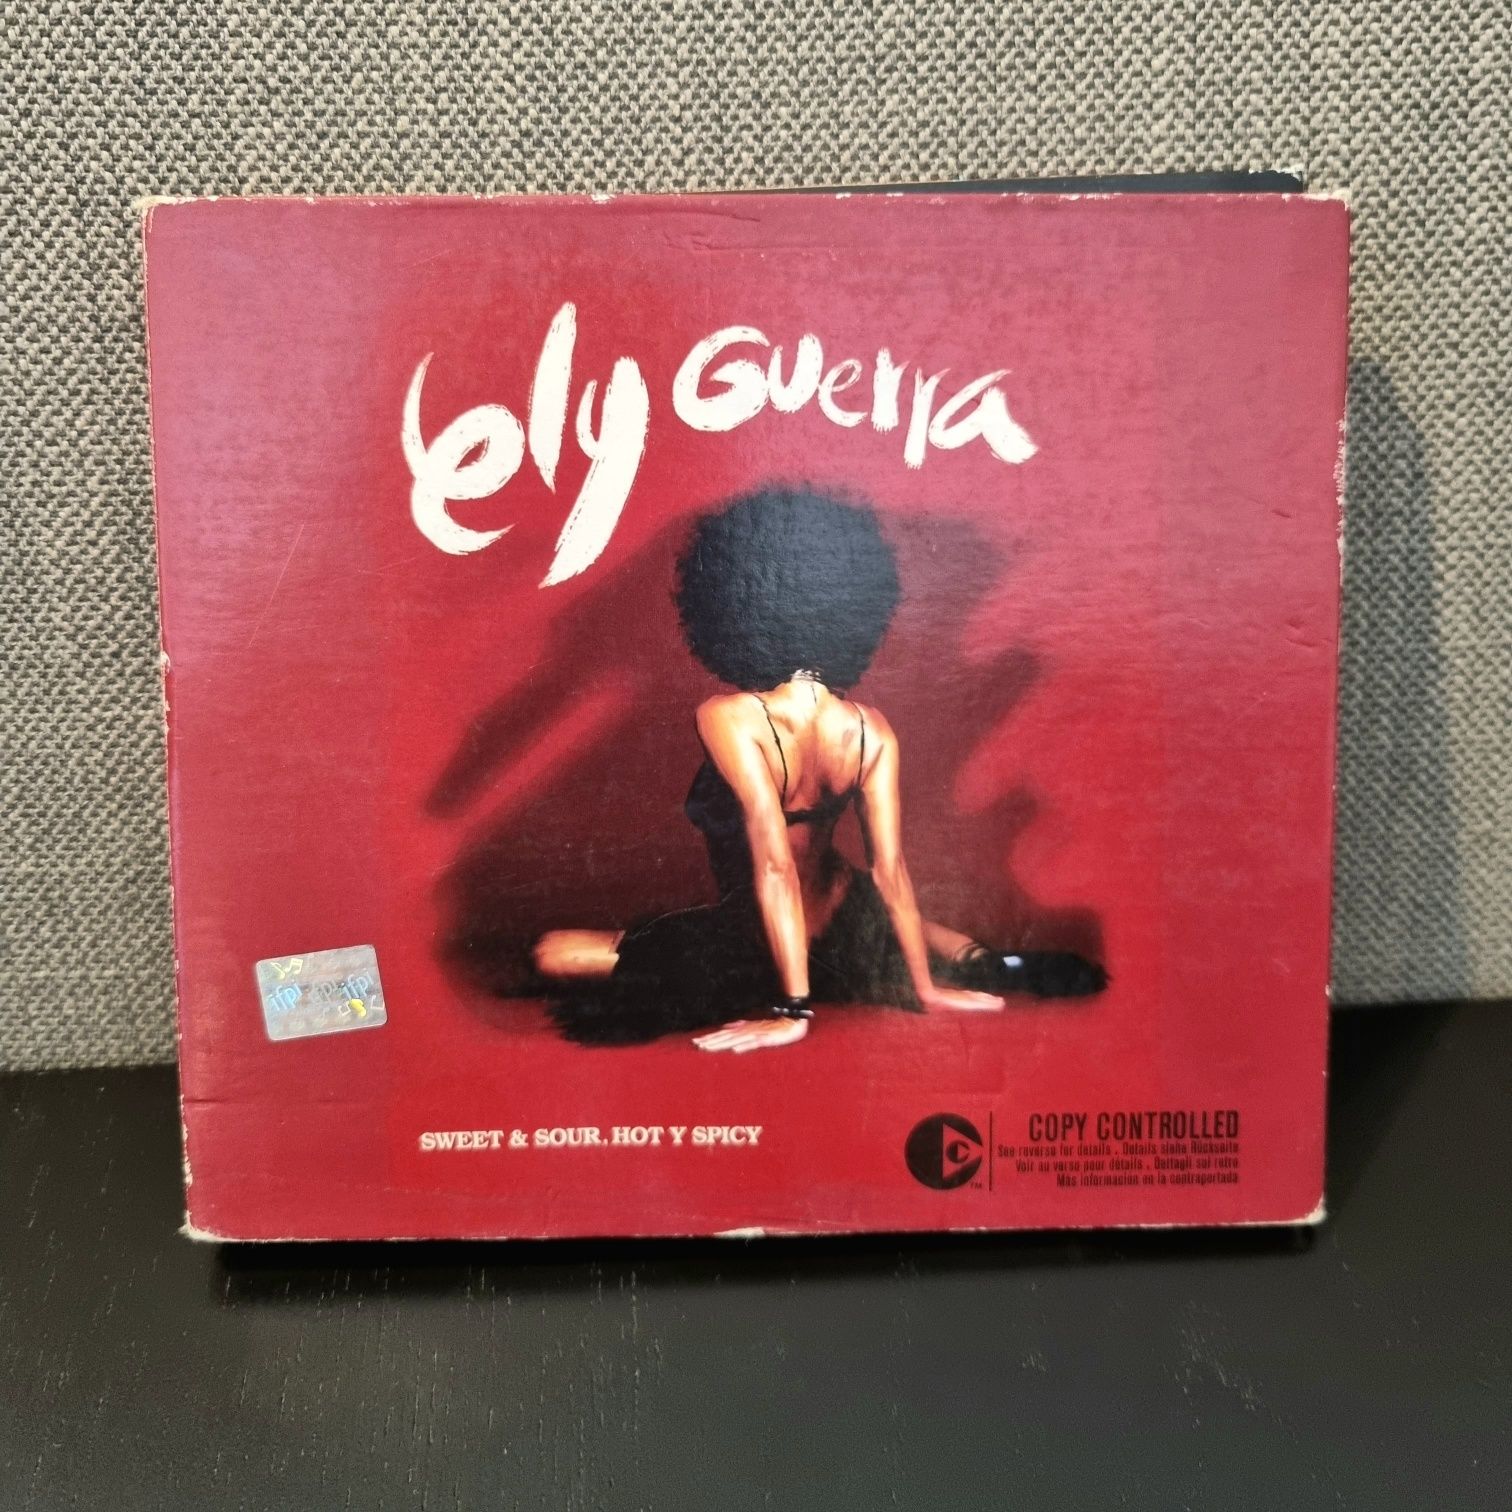 Cd - Ely Guerra (sweet&sour, hot&spicy)